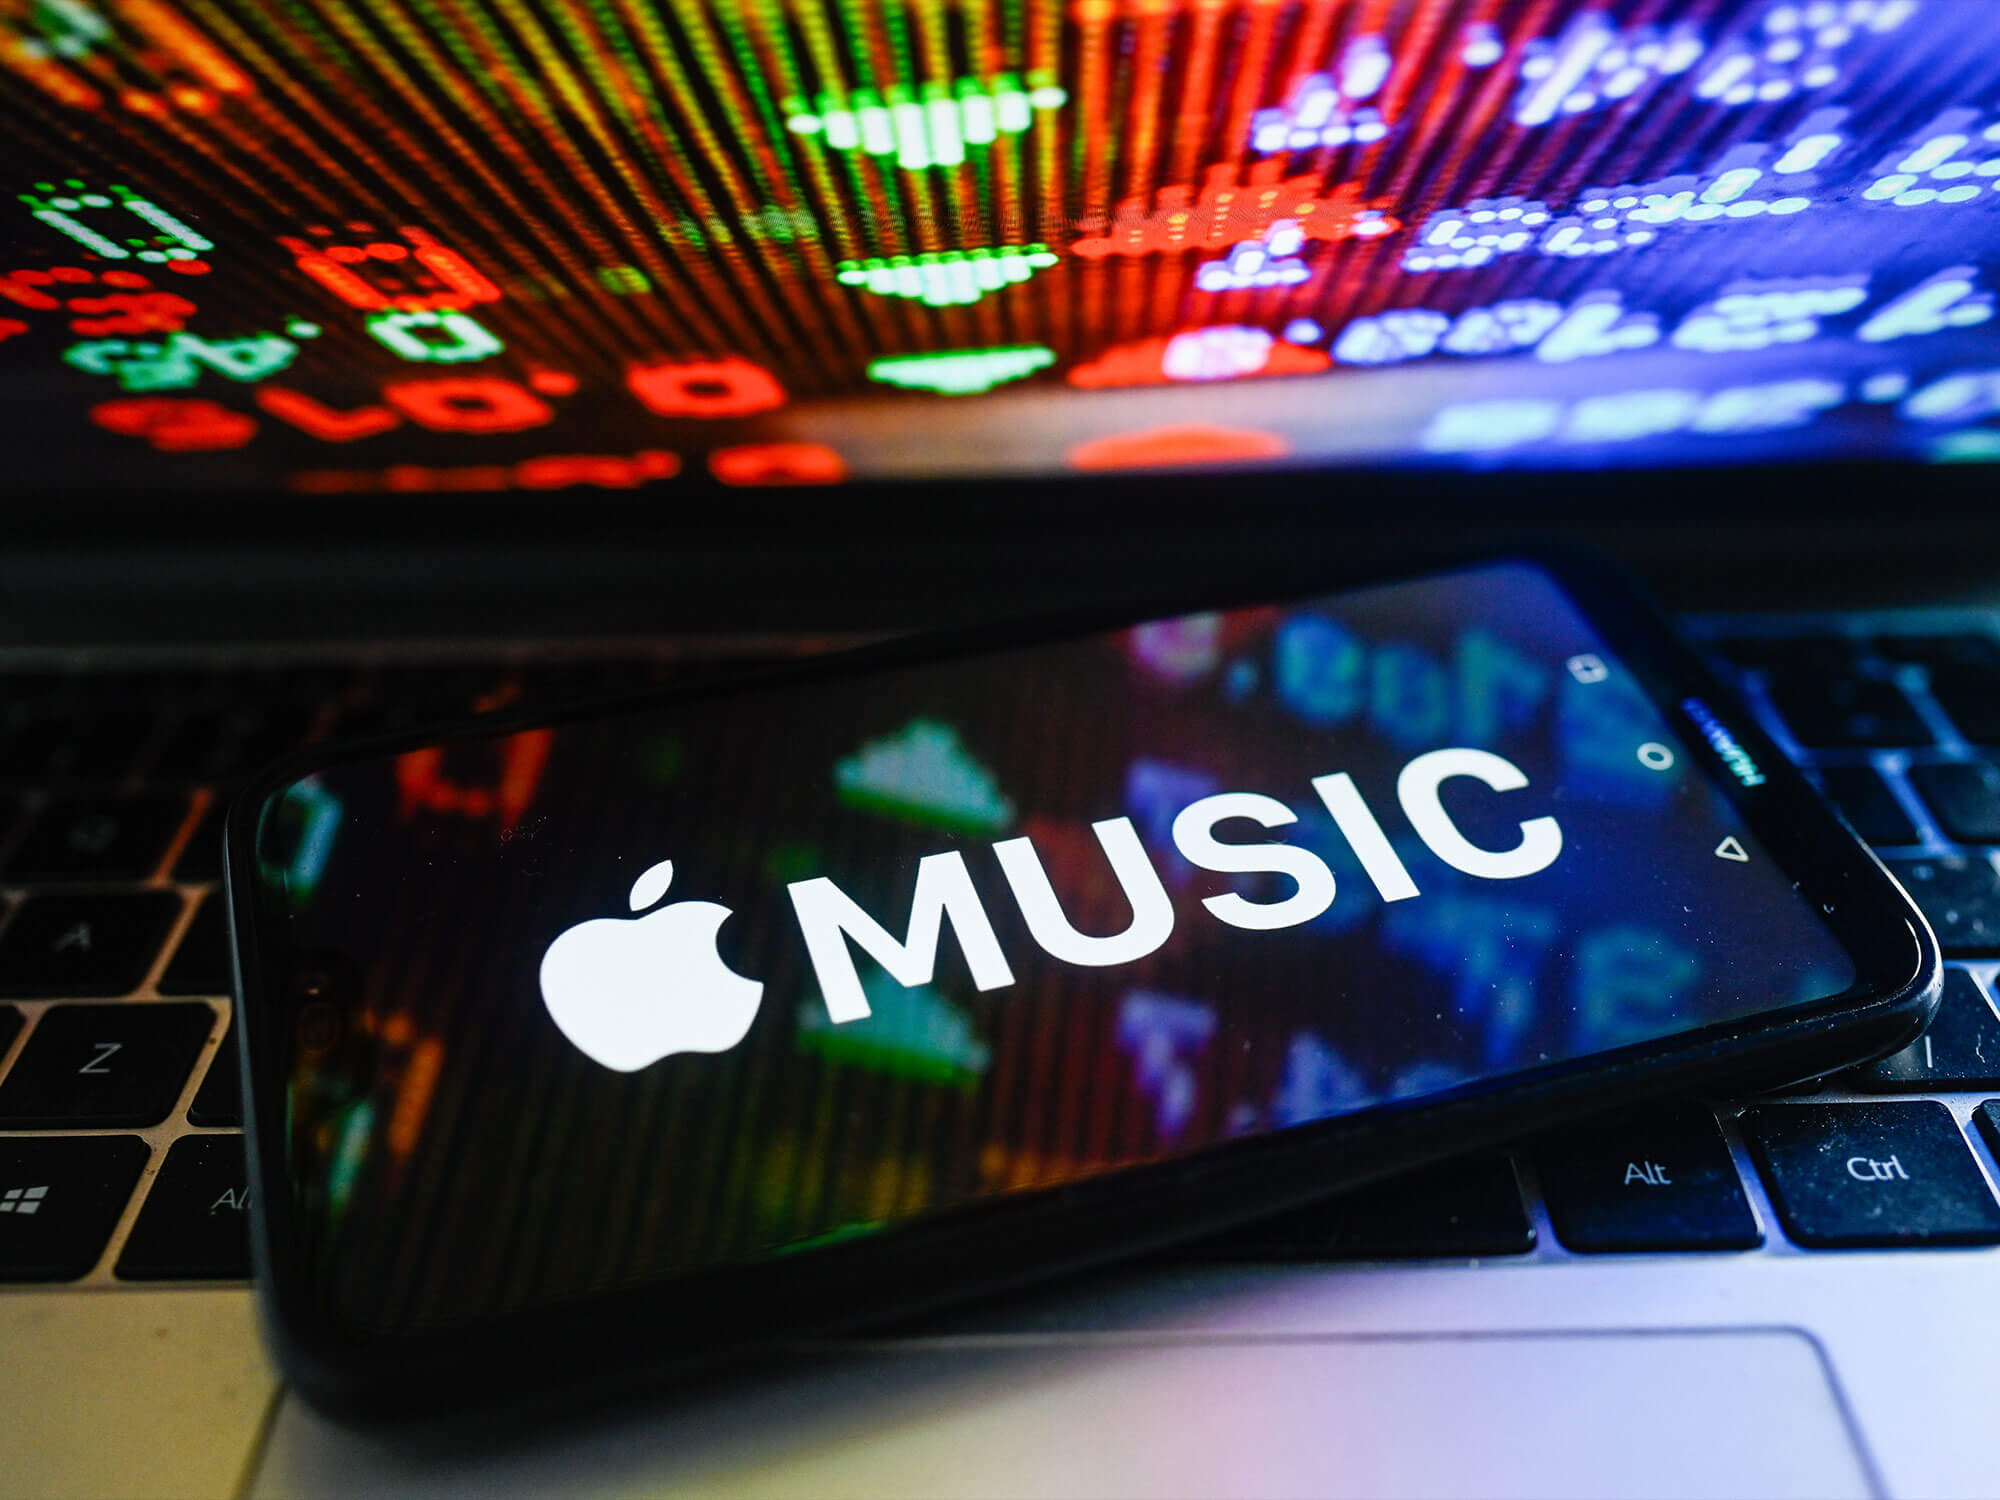 Apple Music logo on a phone, which is on a laptop keyboard